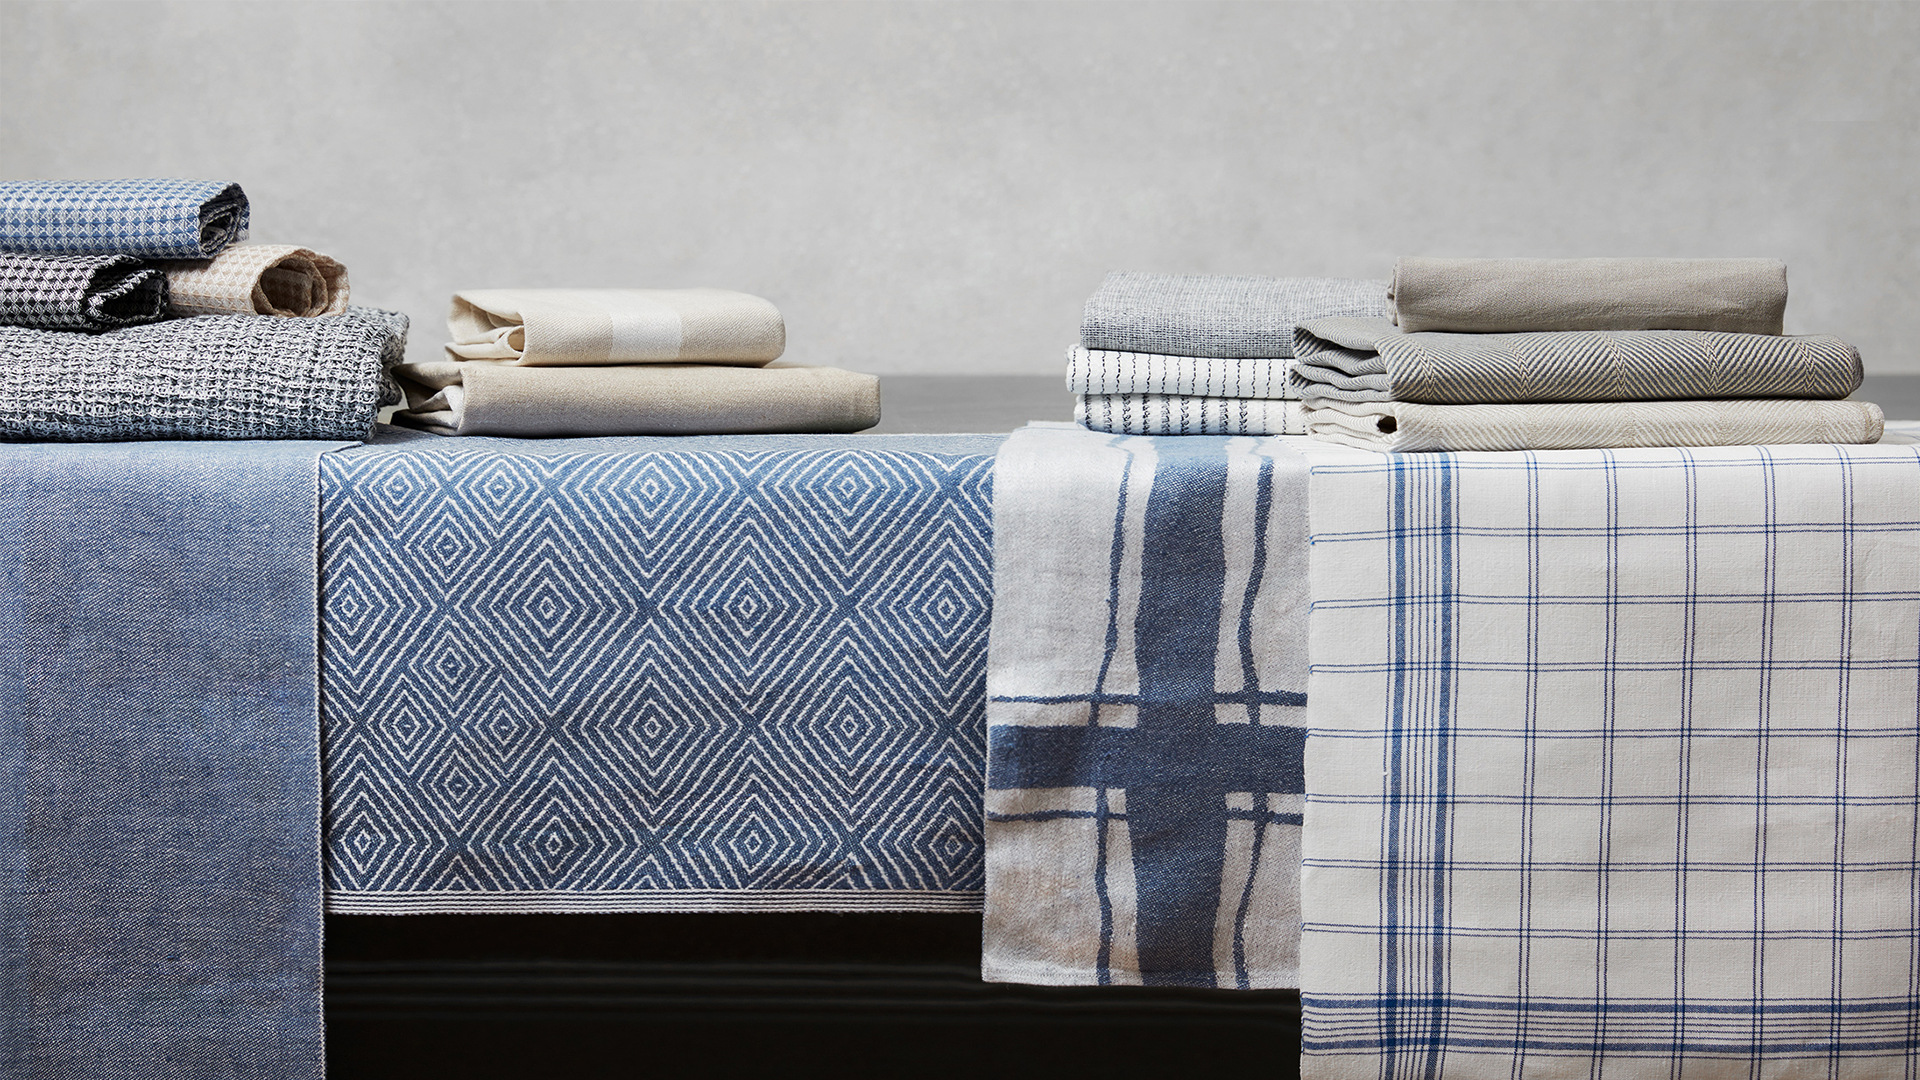 category with different towels displayed